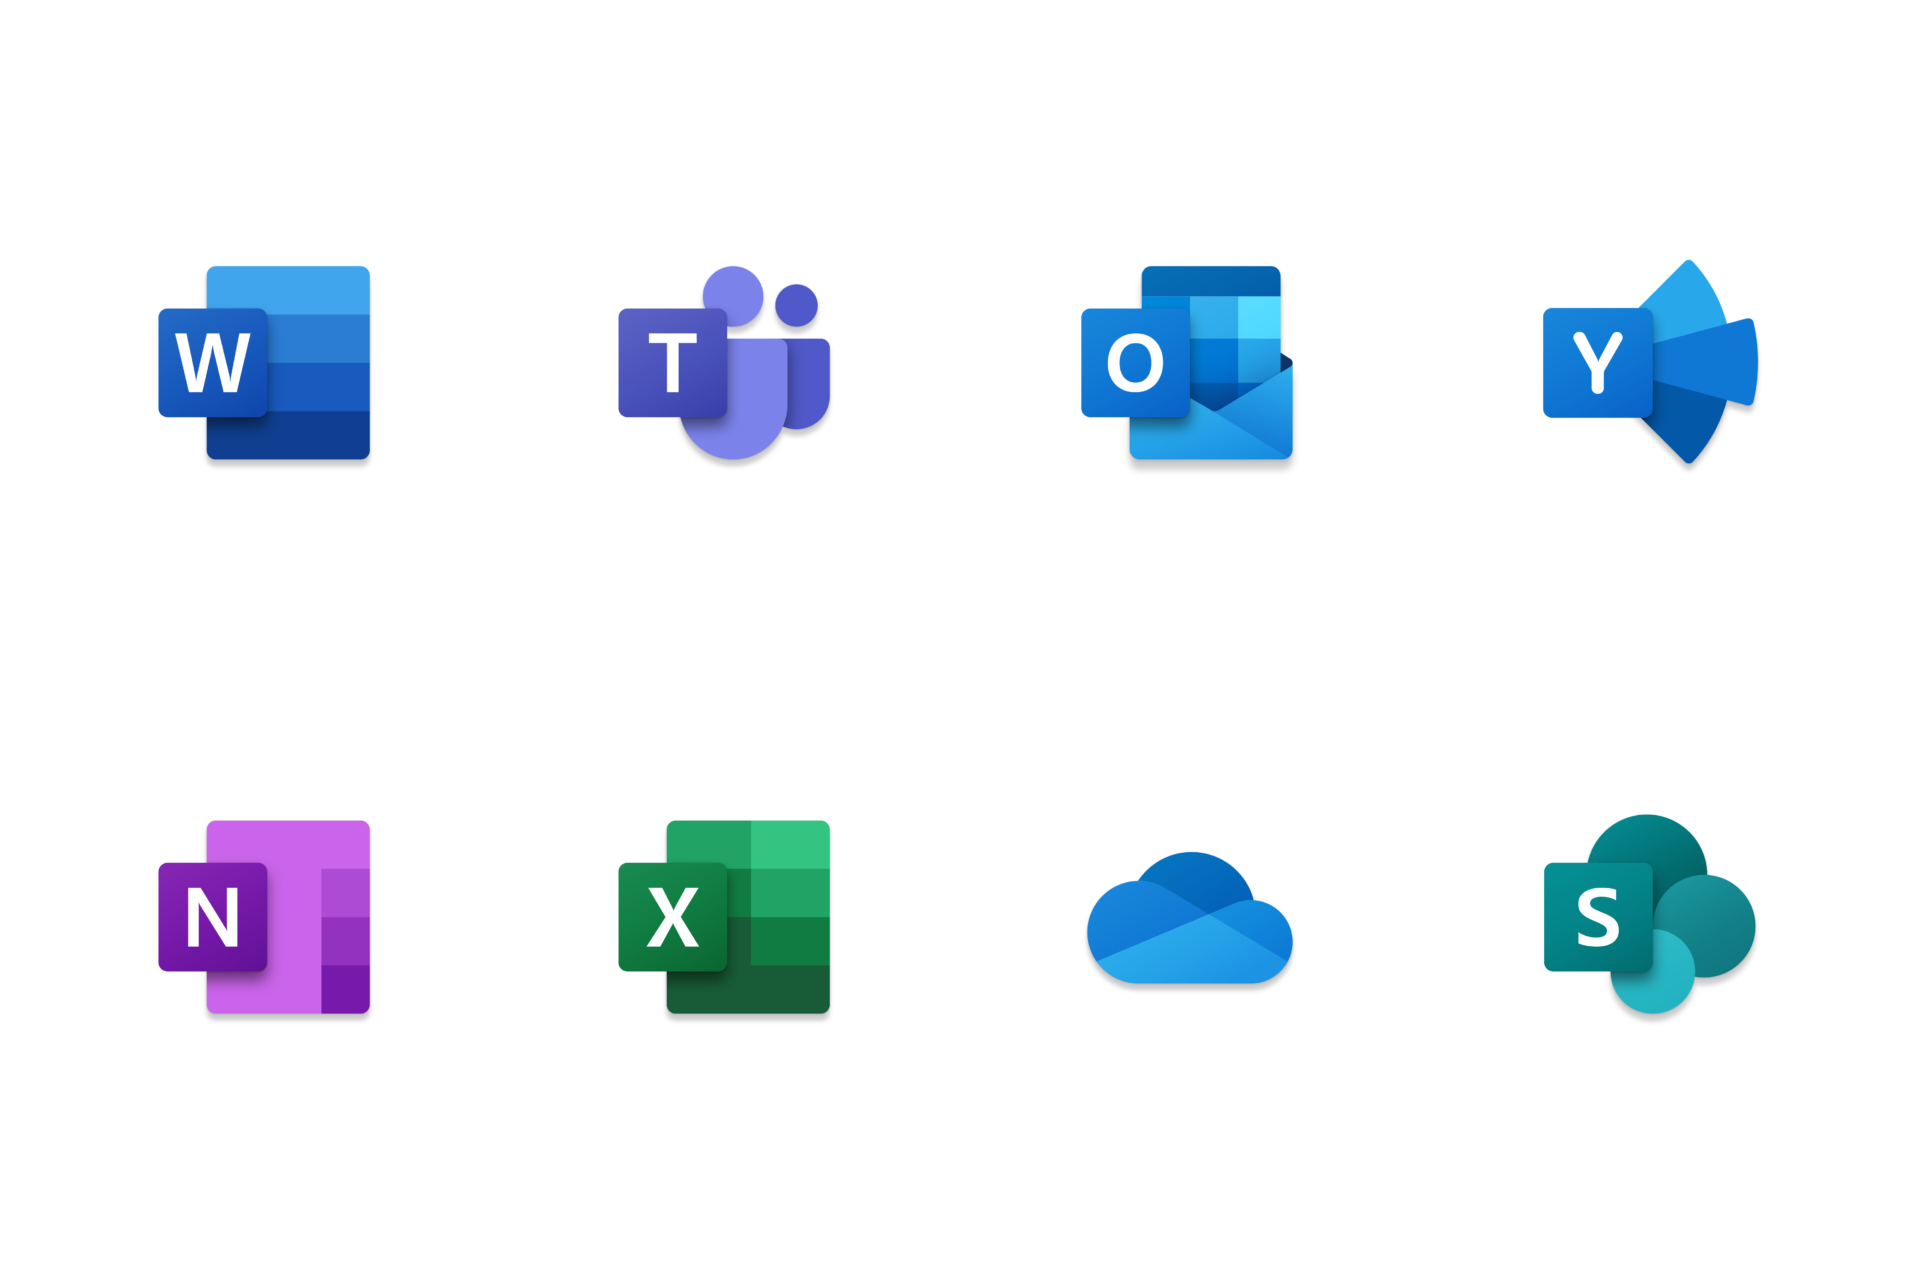 microsoft product Icons, Word, Teams, Outlook, Yammer, Notepad, Excel, Onedrive, Sharepoint